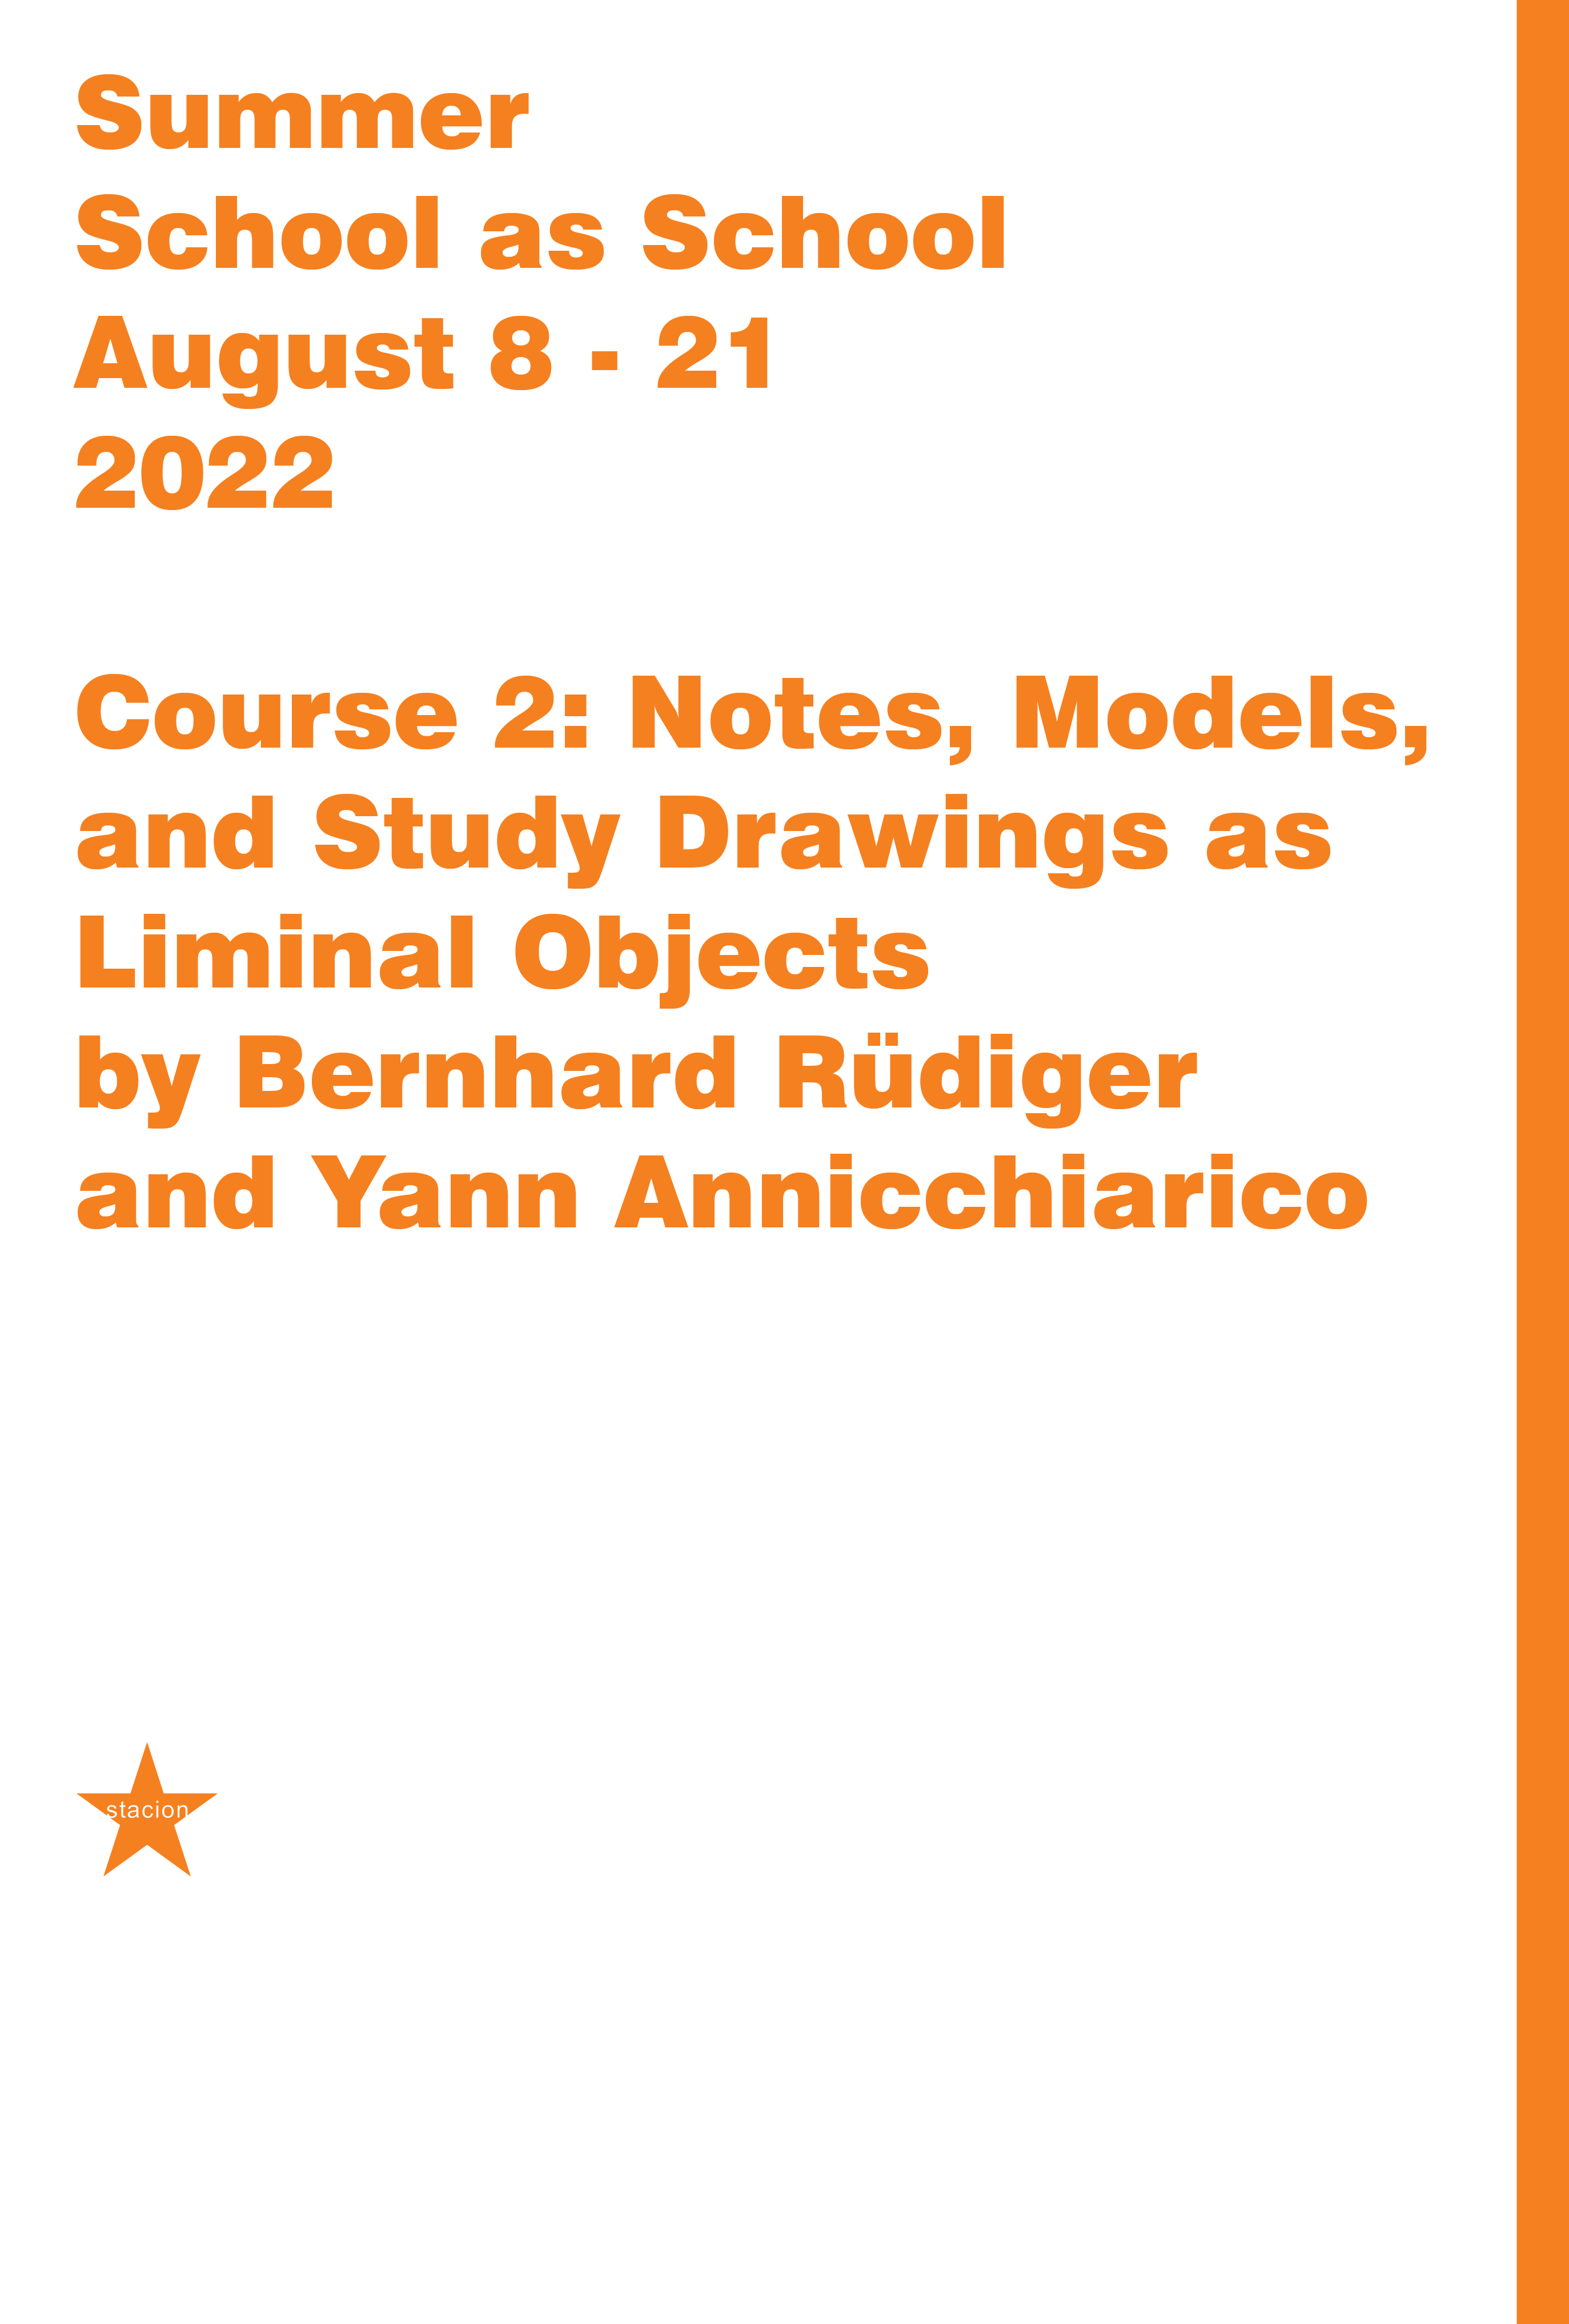 Course 2: Notes, Models, and Study Drawings as Liminal objects